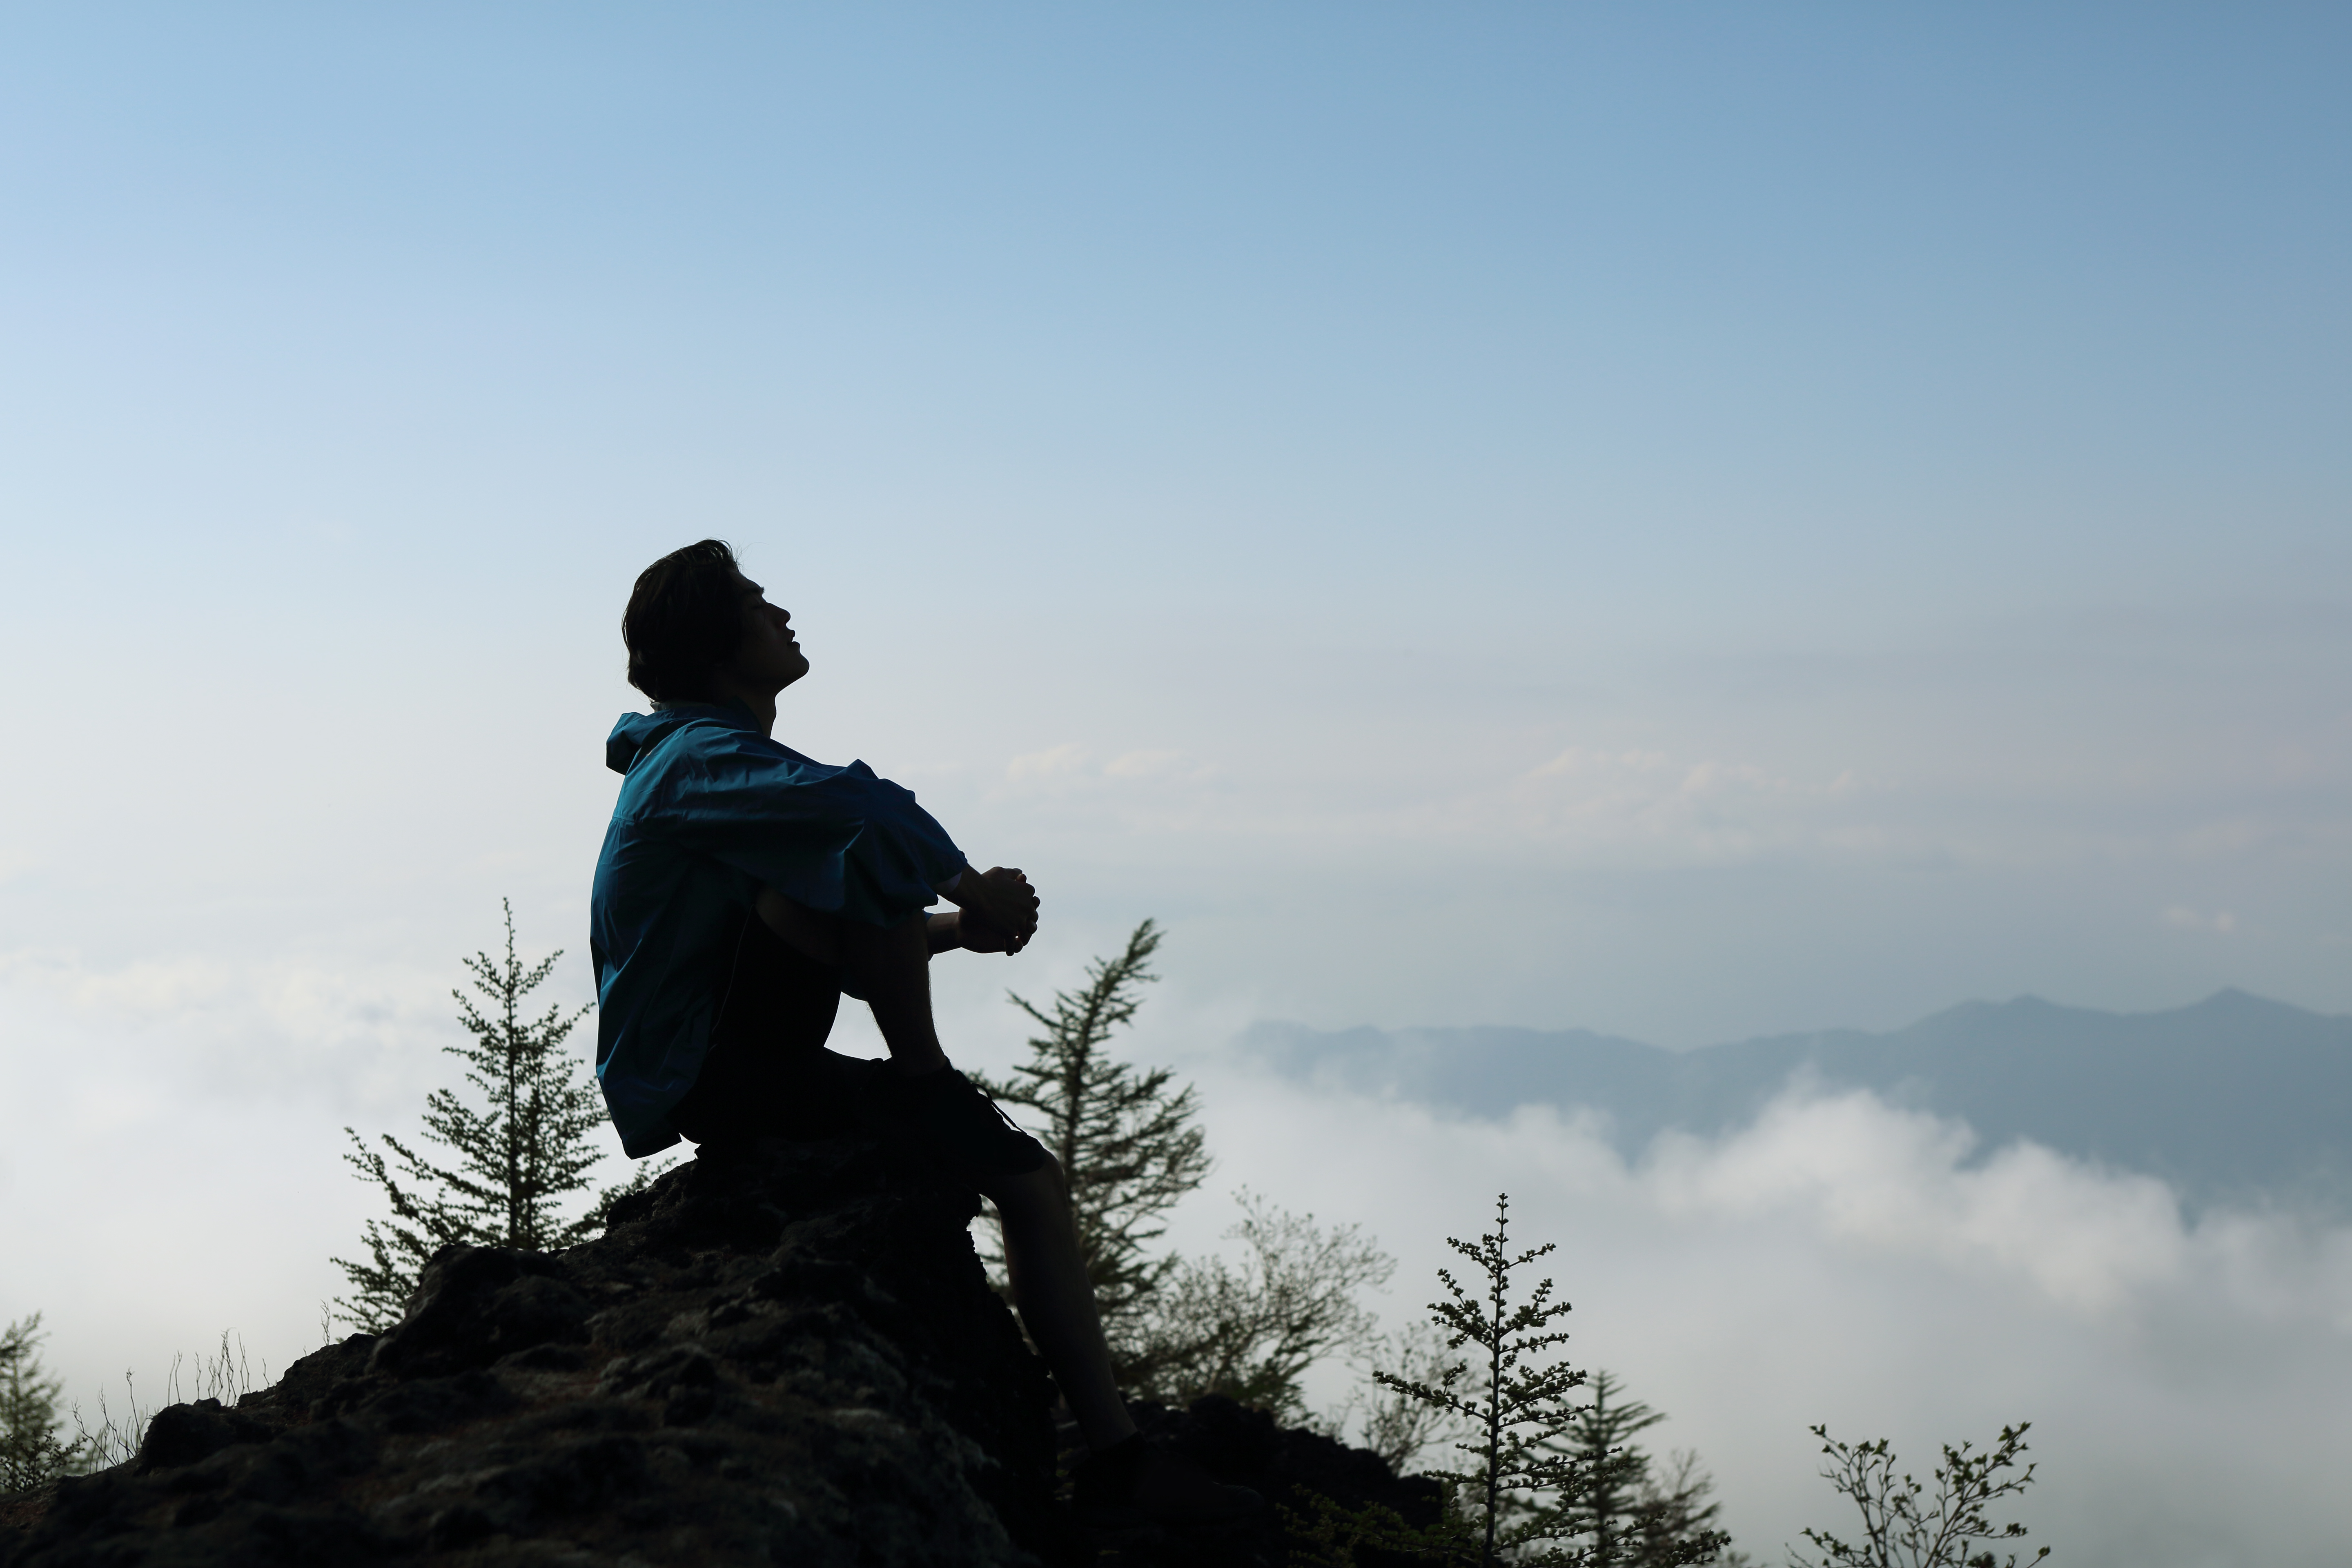 A man sitting on a mountain with the clouds behind him.